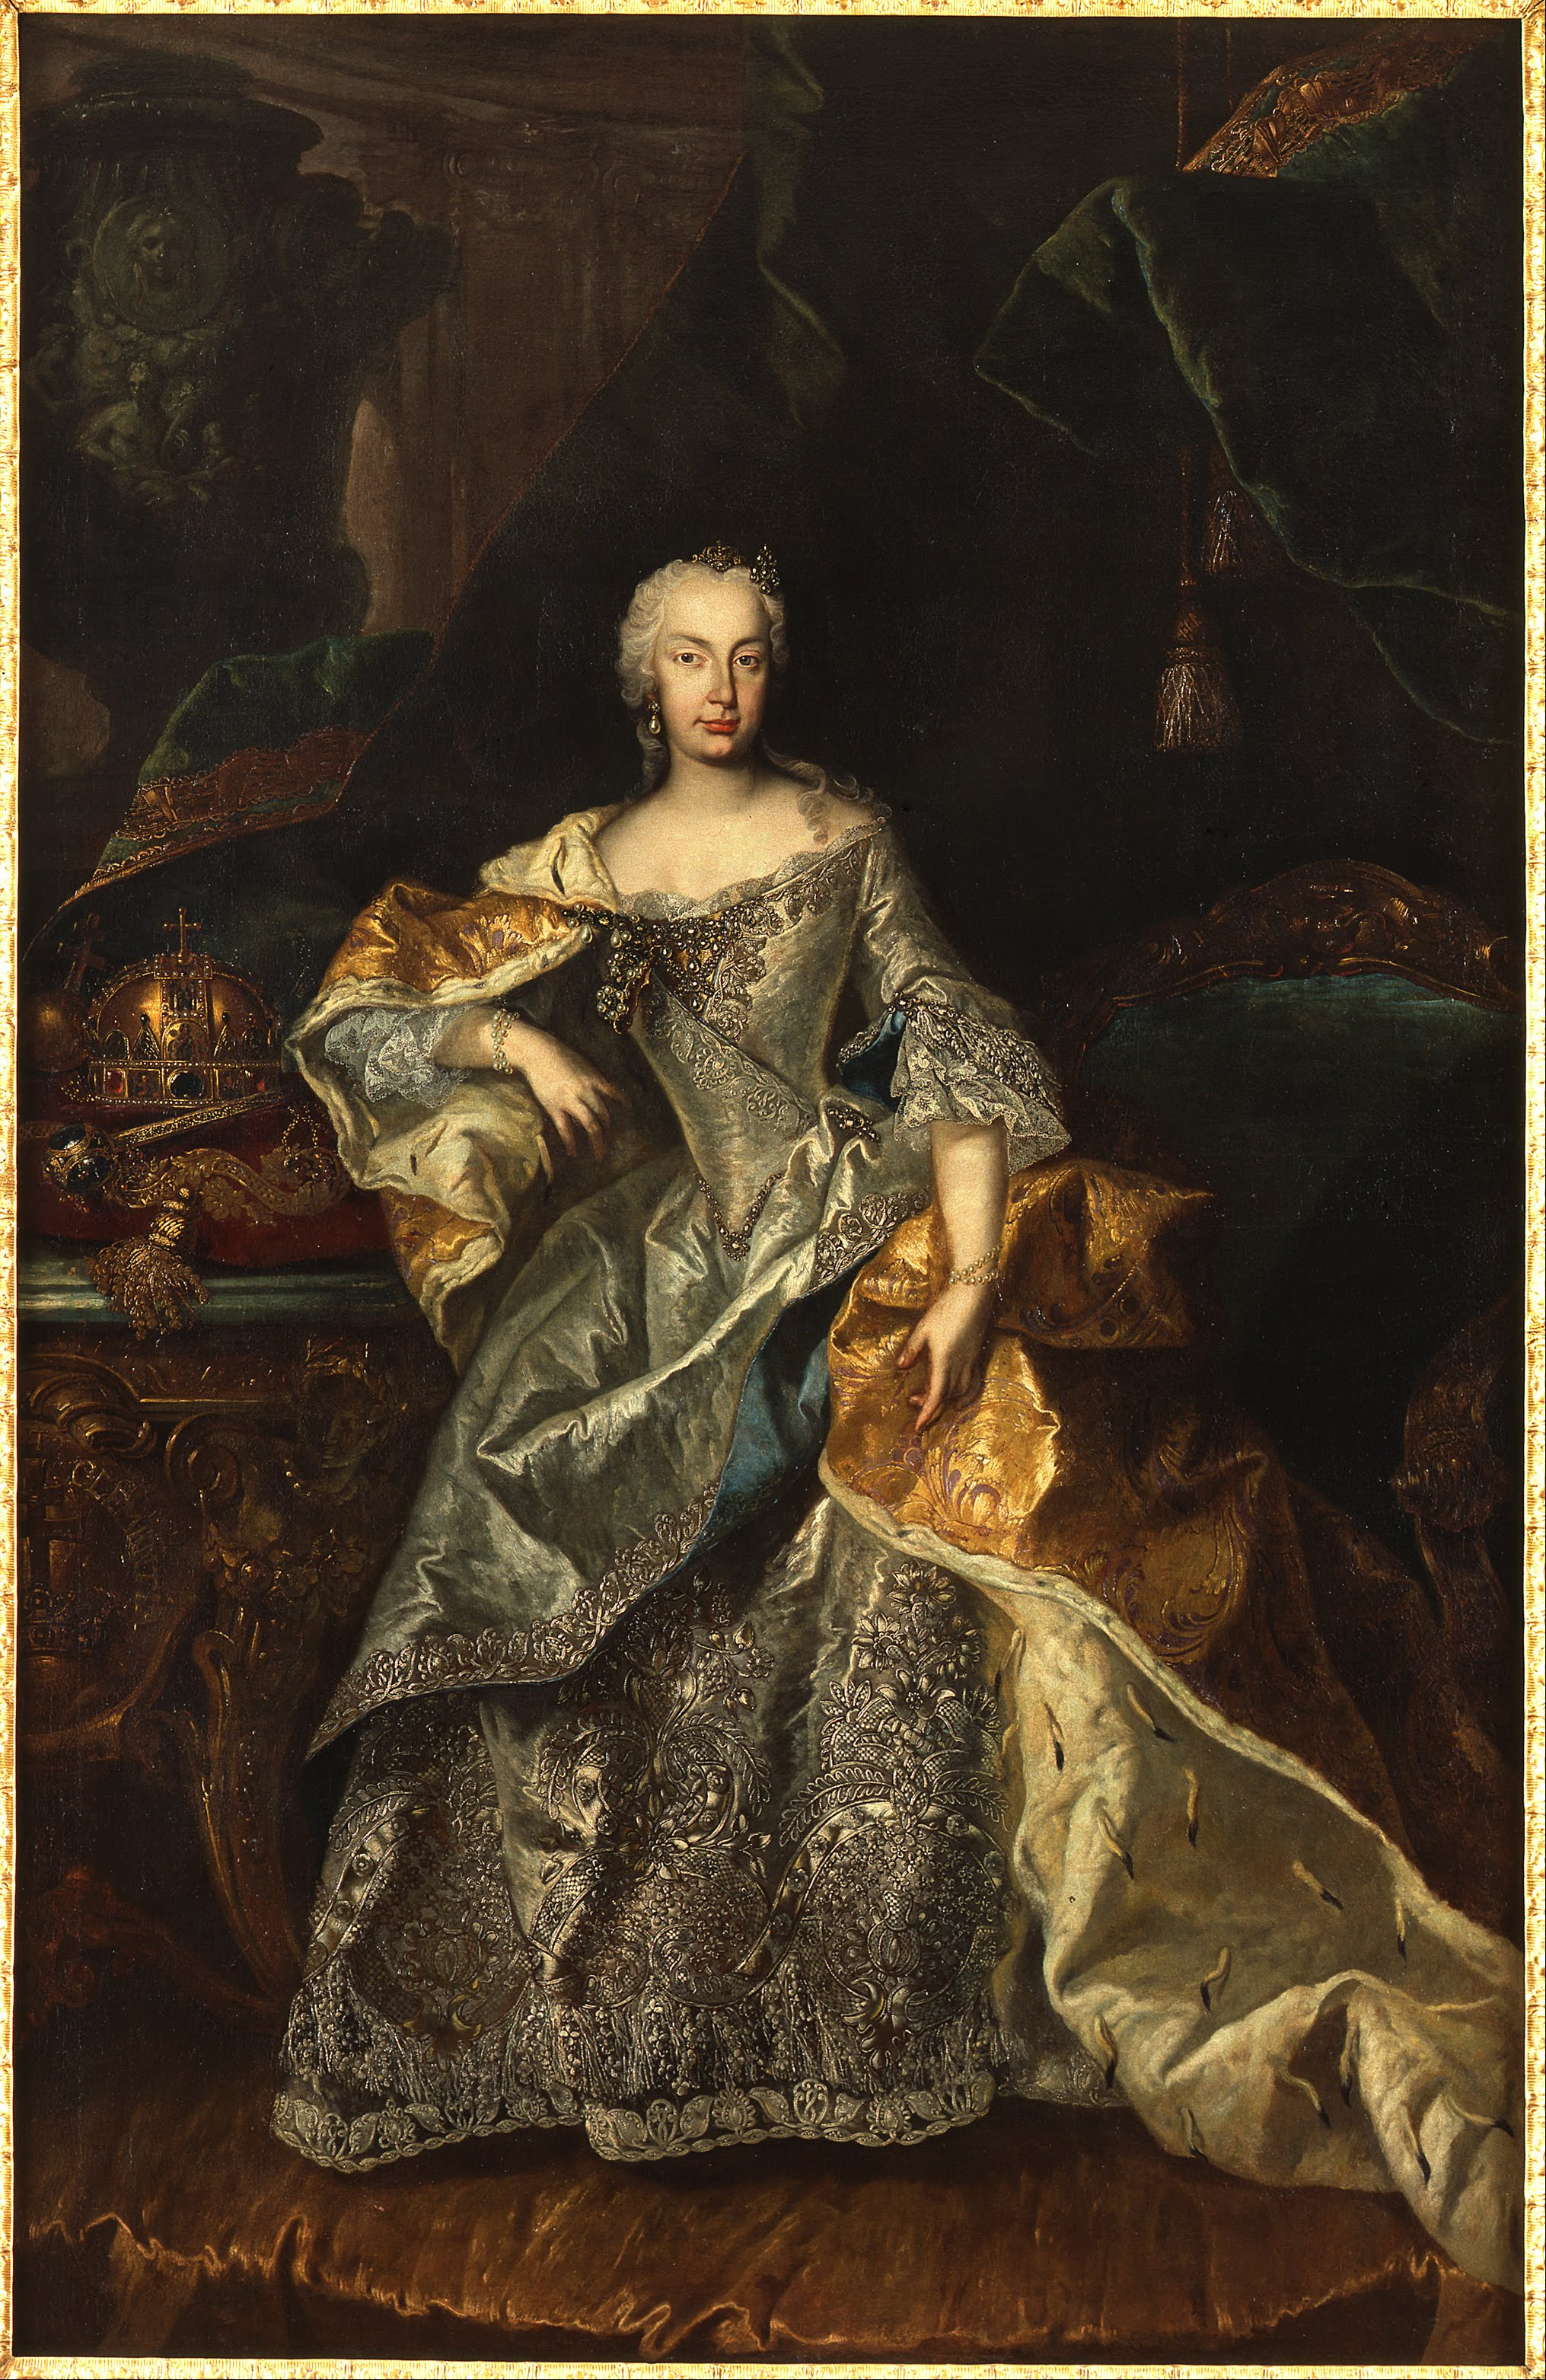 Viennese painter - Maria Theresa as Queen of Hungary - Google Art Project